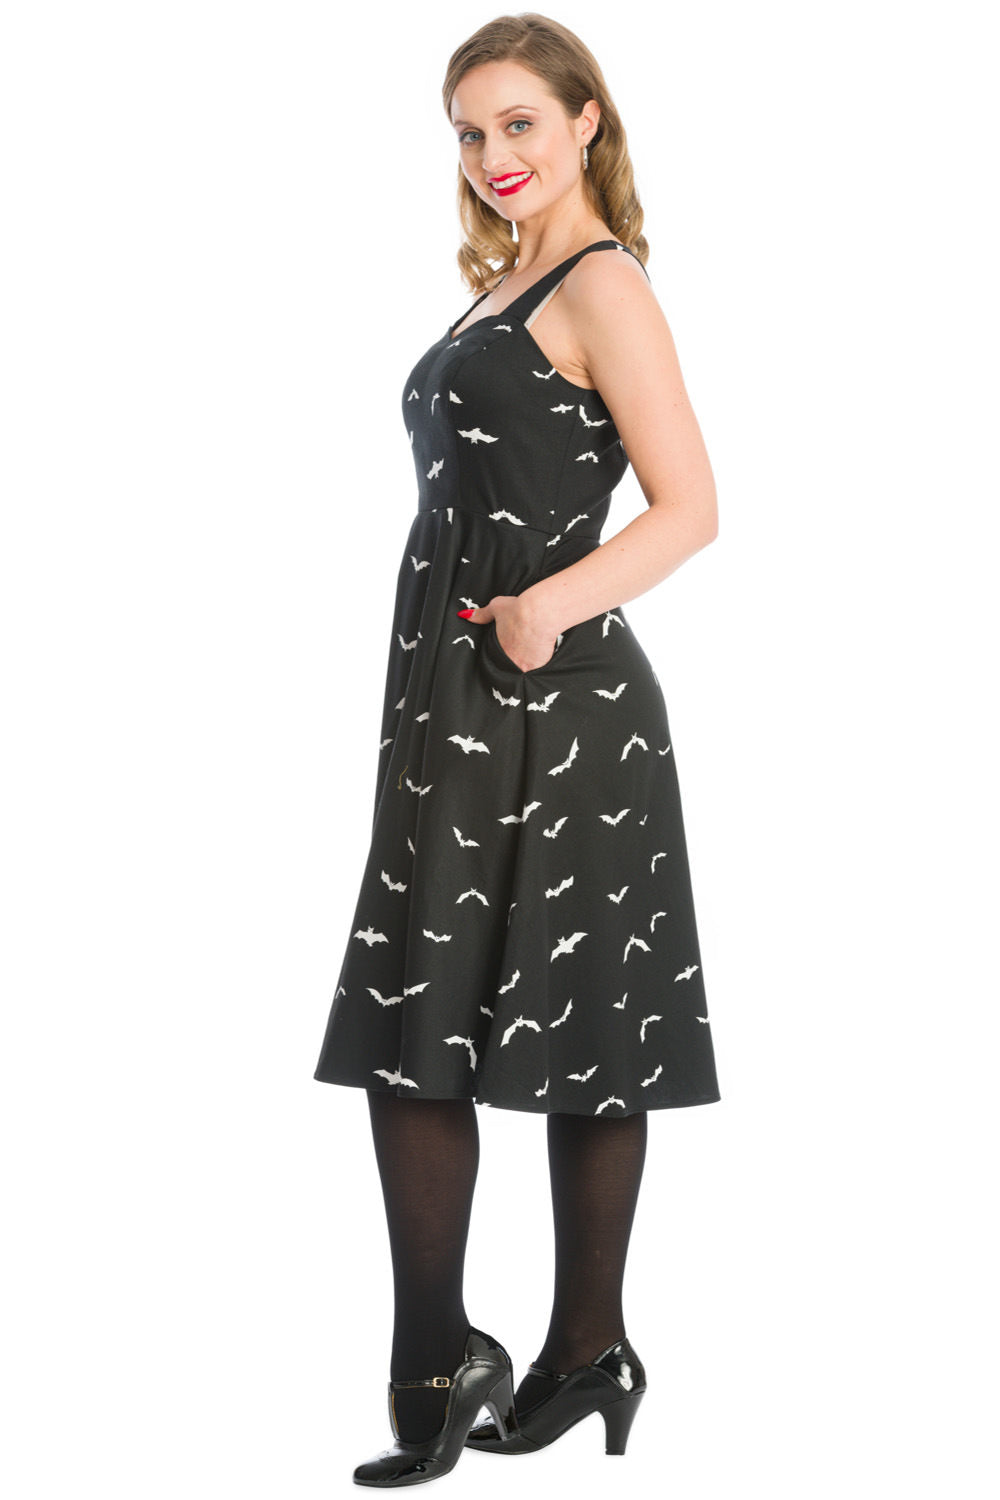 Blonde woman with a warm smile standing gracefully in a stylish black swing dress adorned with an all-over white bat print,  with her hands in the dress pockets 